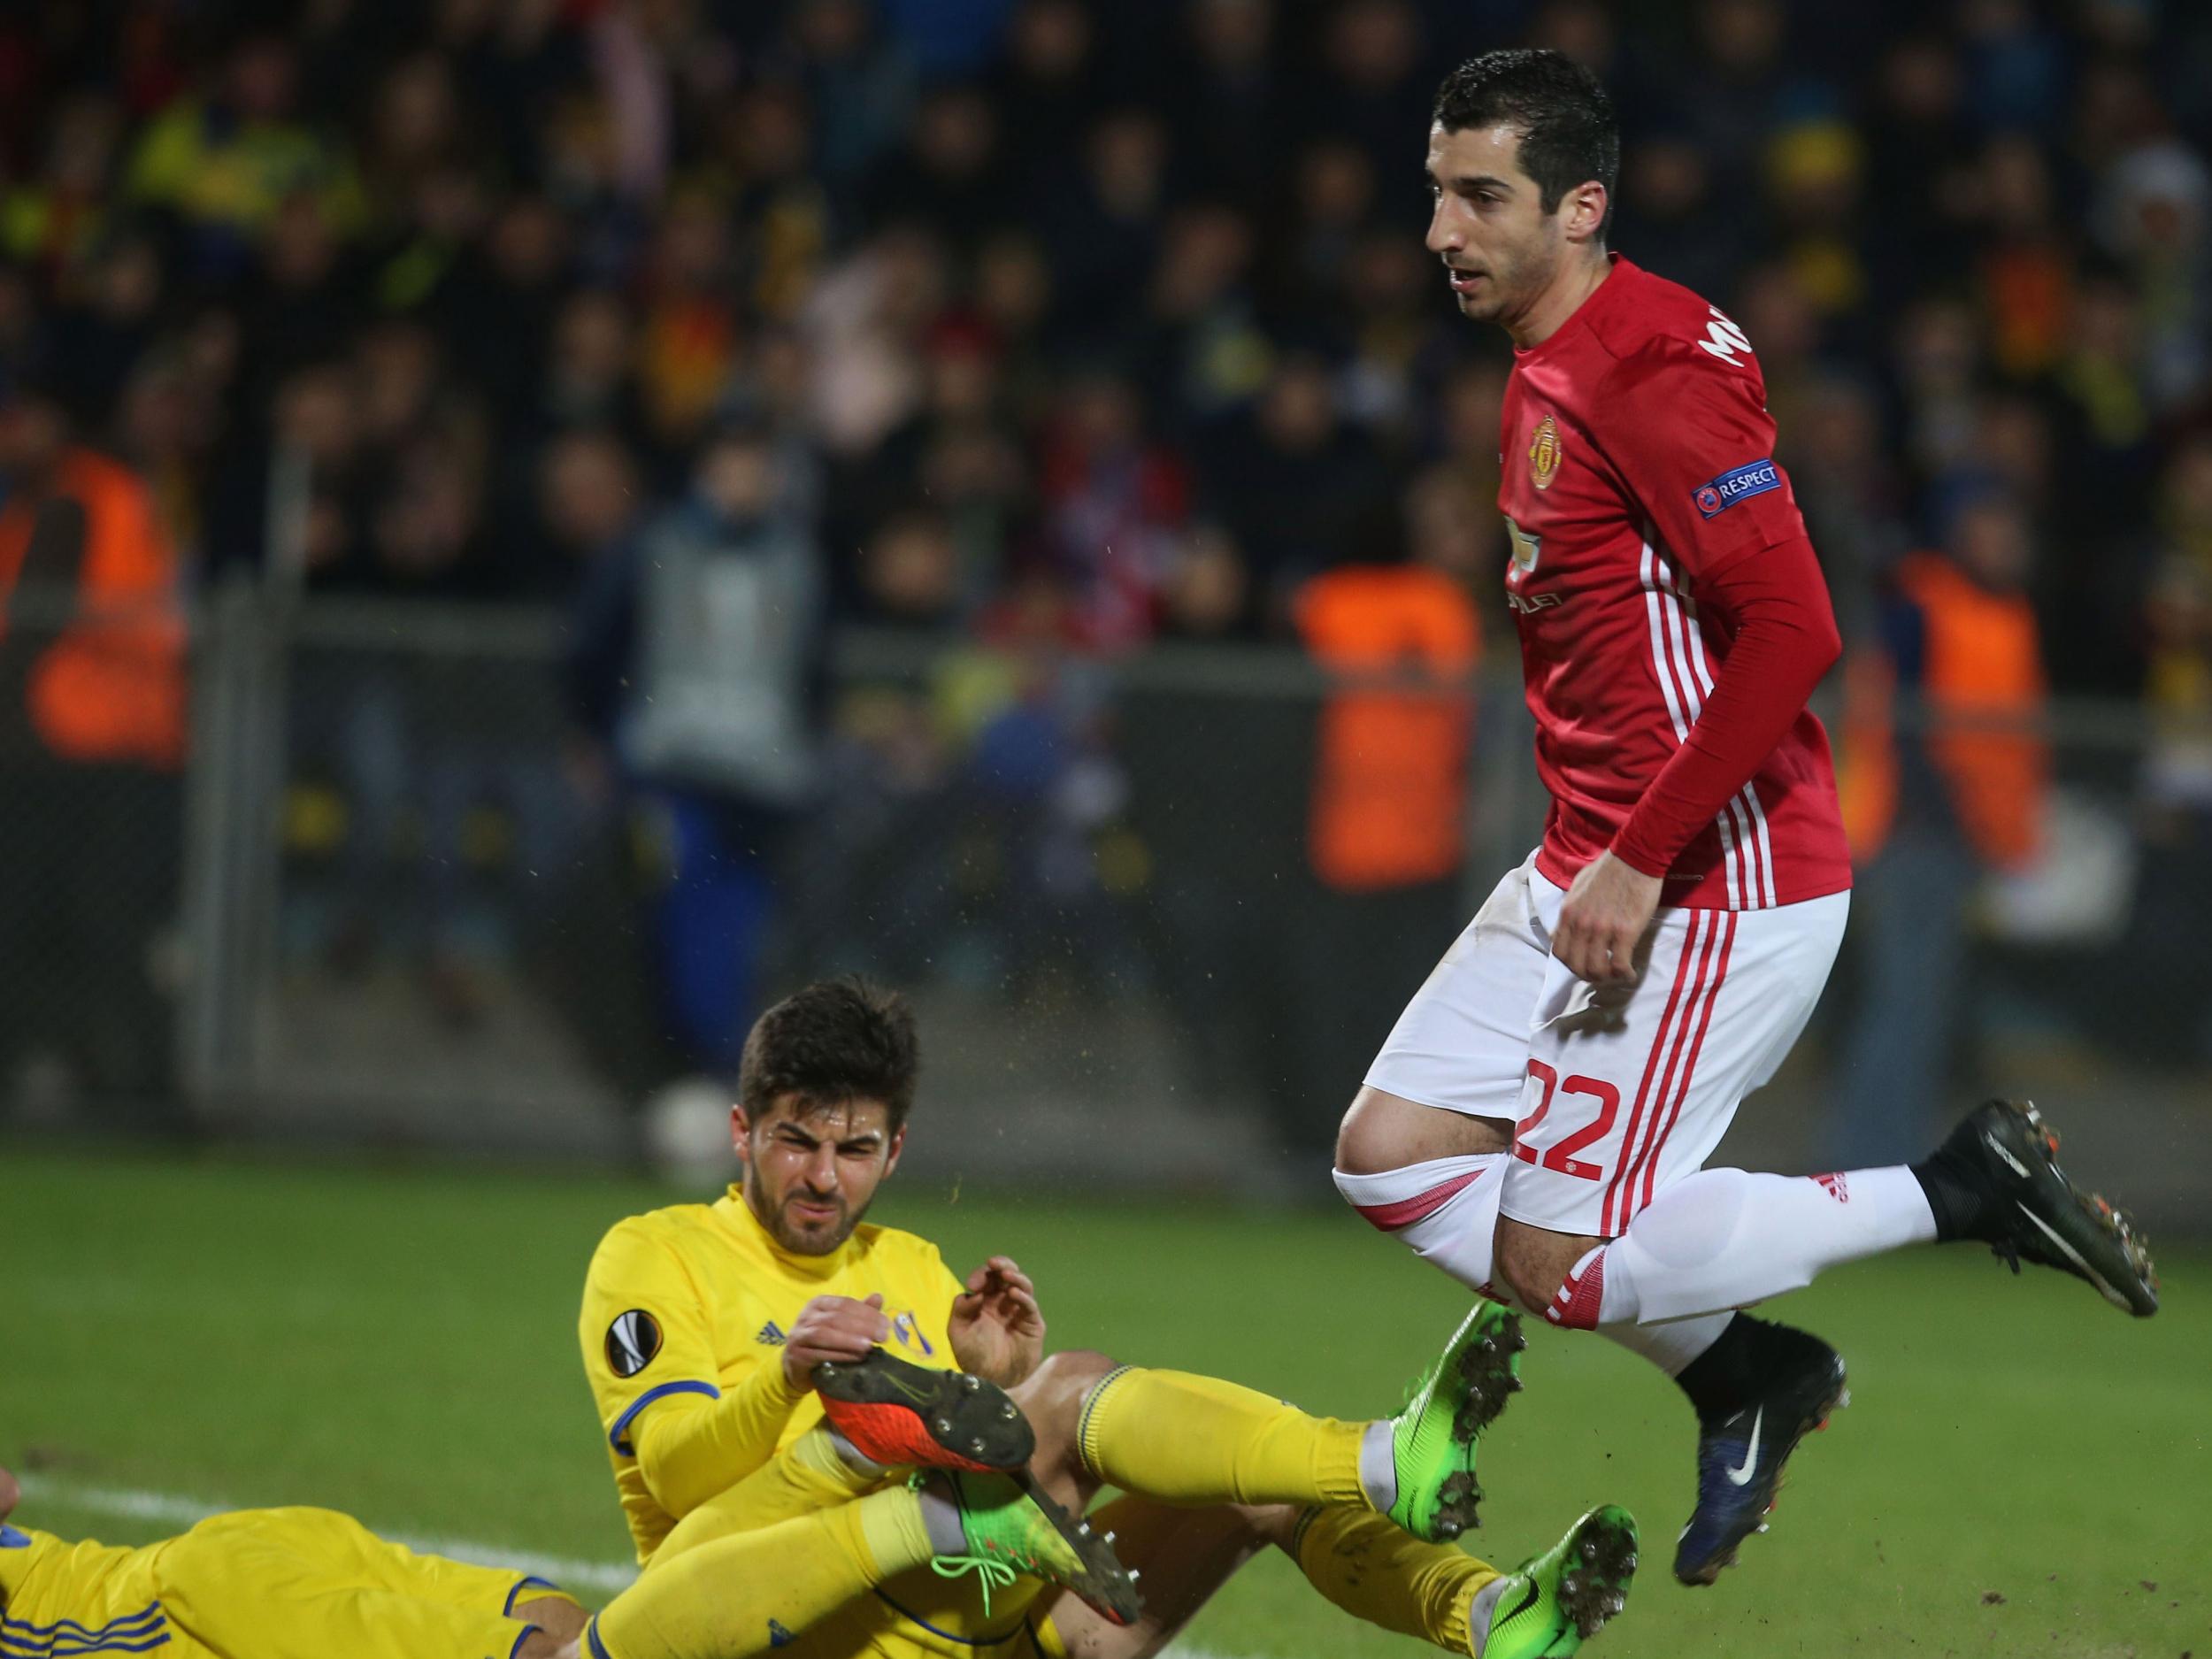 Mkhitaryan will likely start at no 10 against Chelsea